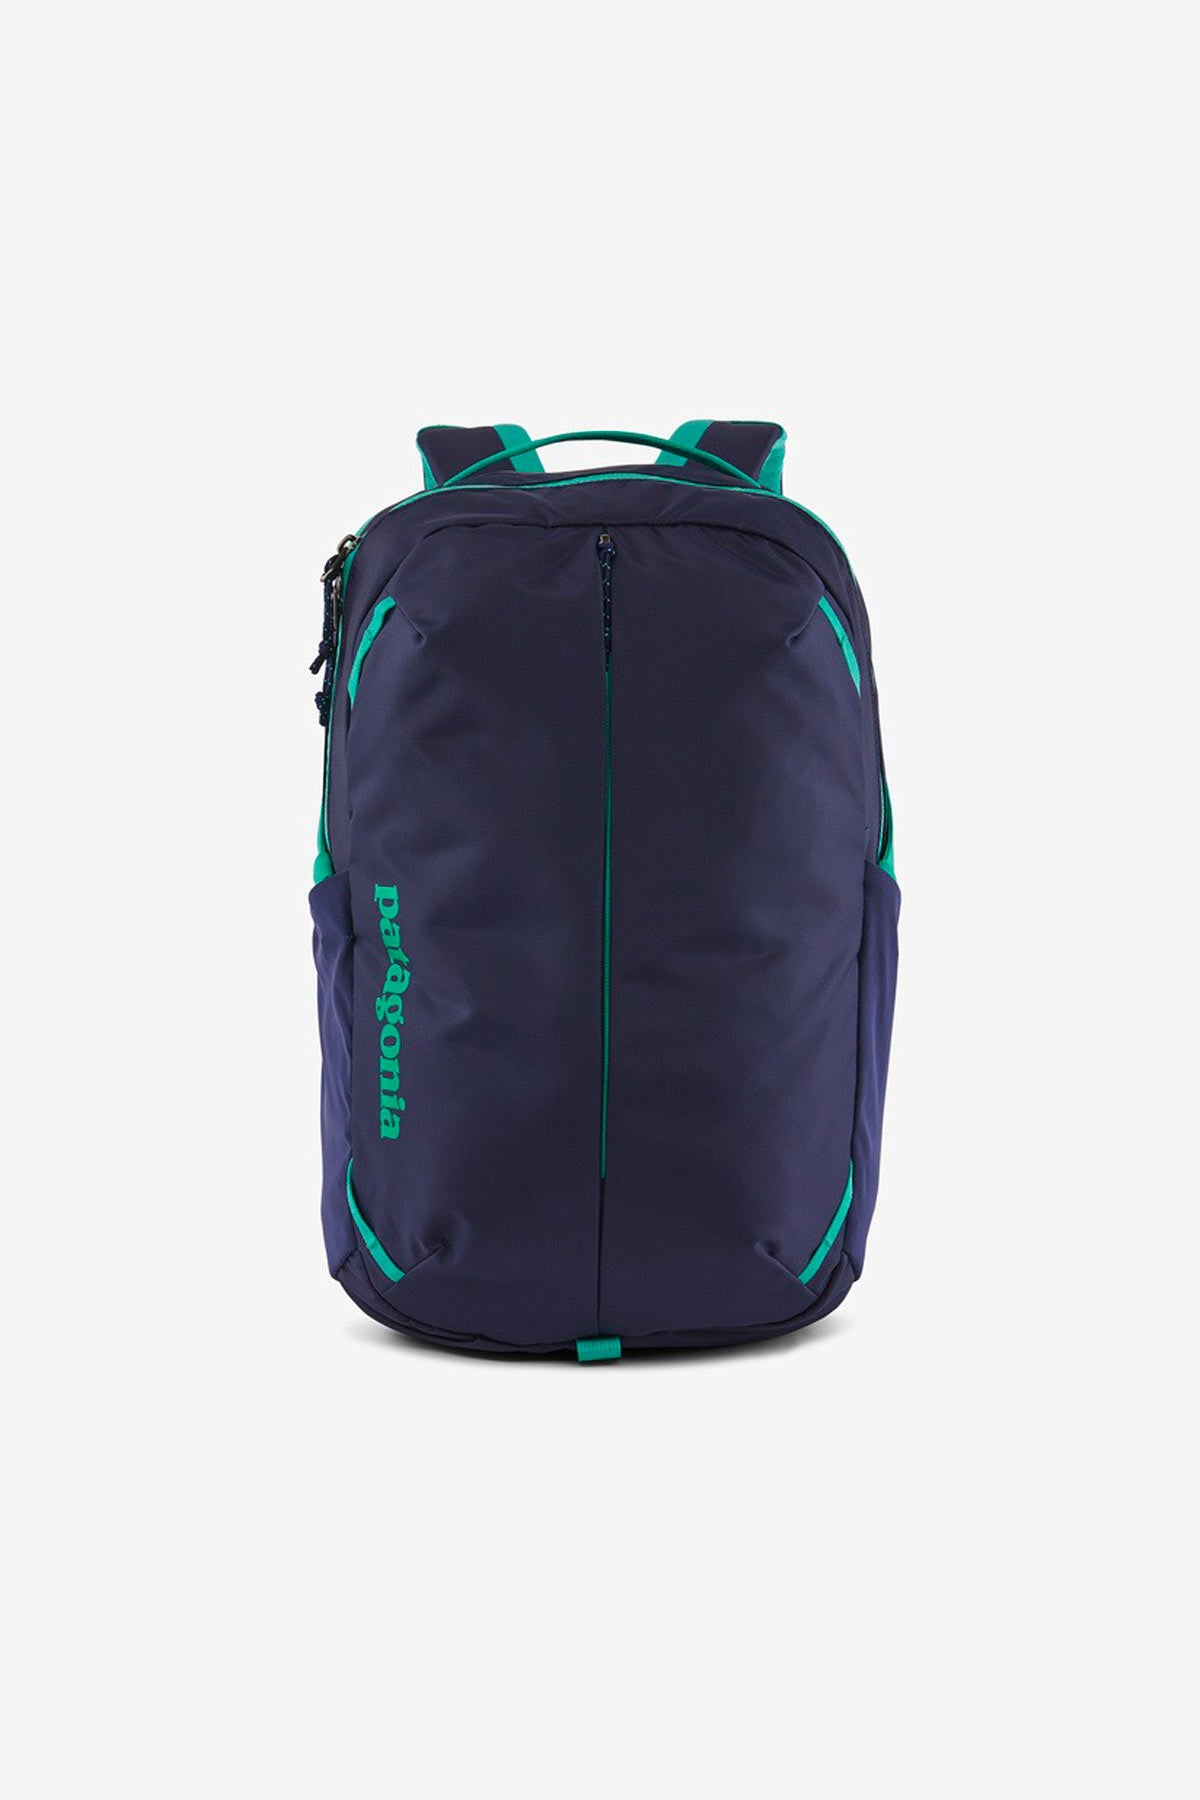 Refugio Day Pack 26L - Patagonia